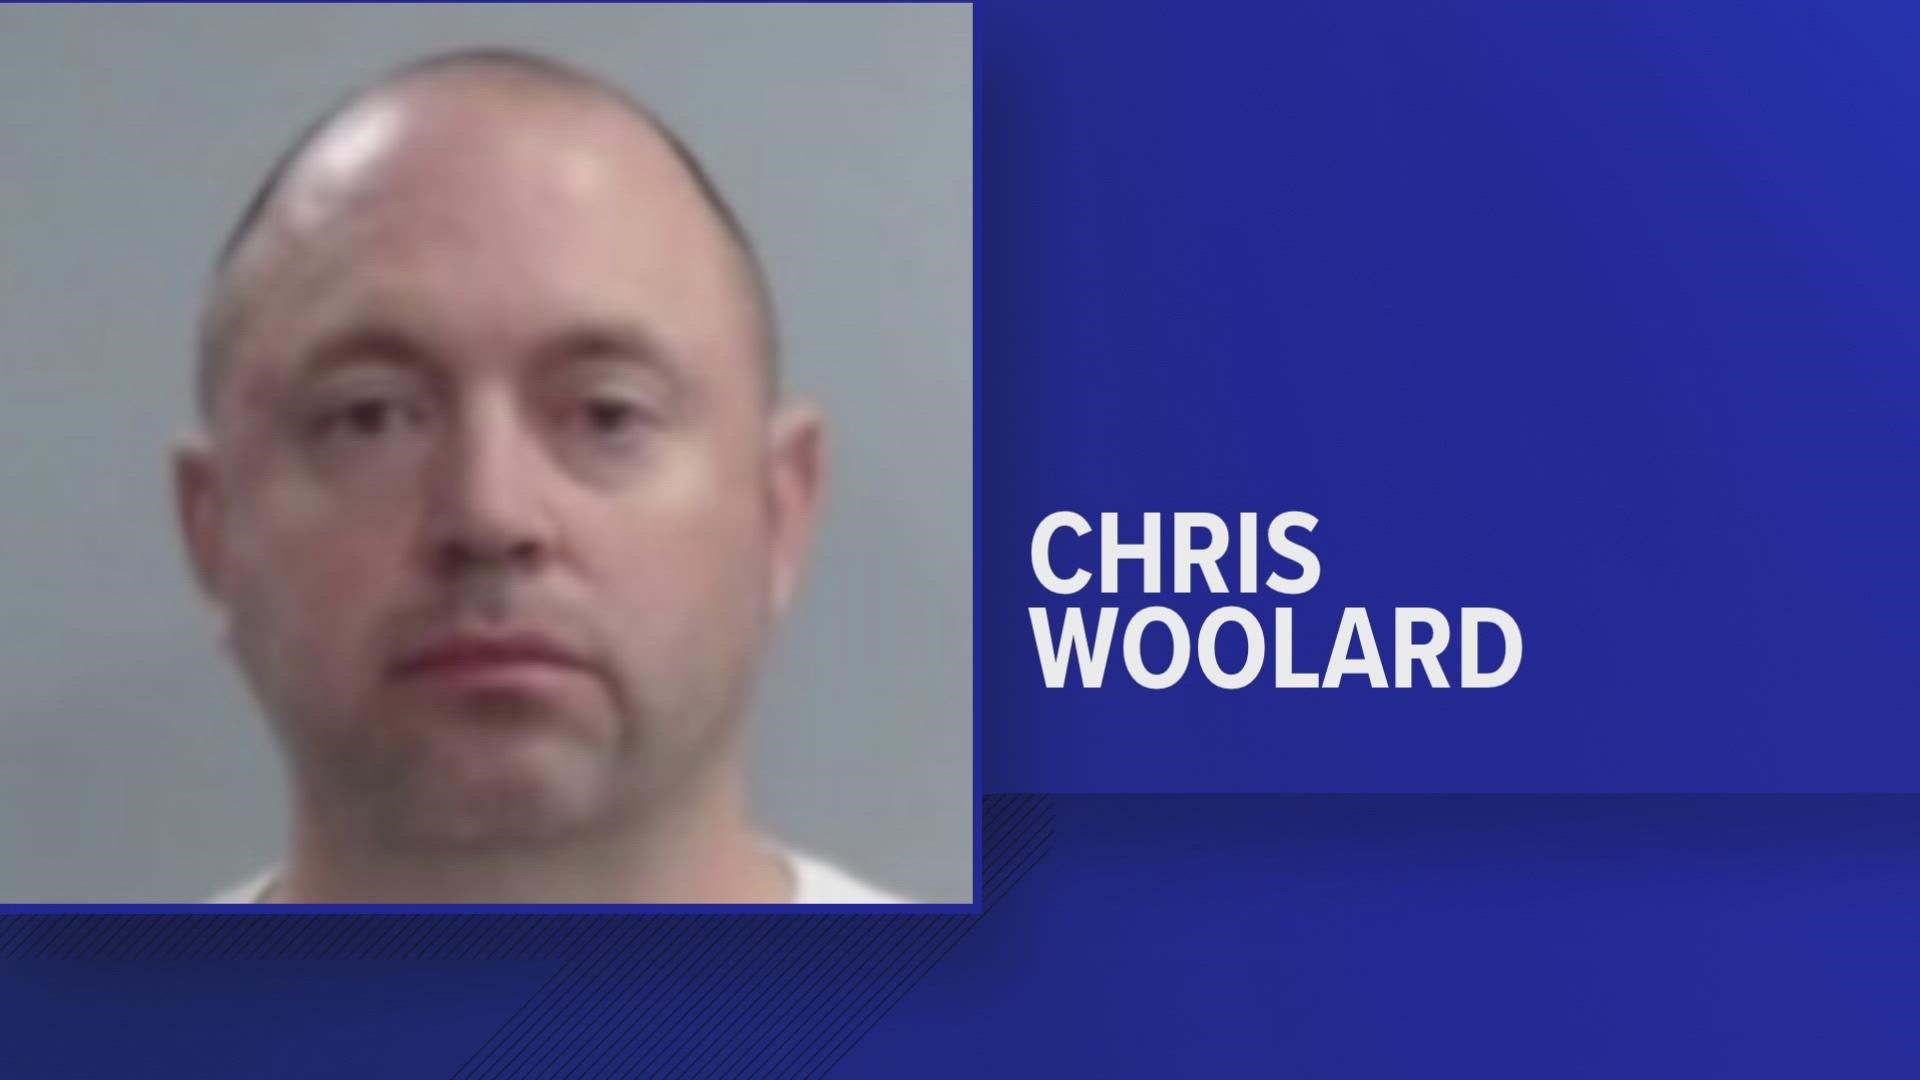 Lexington Police said Chris Woolard was found on Monday in his car, which was resting on the sidewalk next to a fence still in gear.